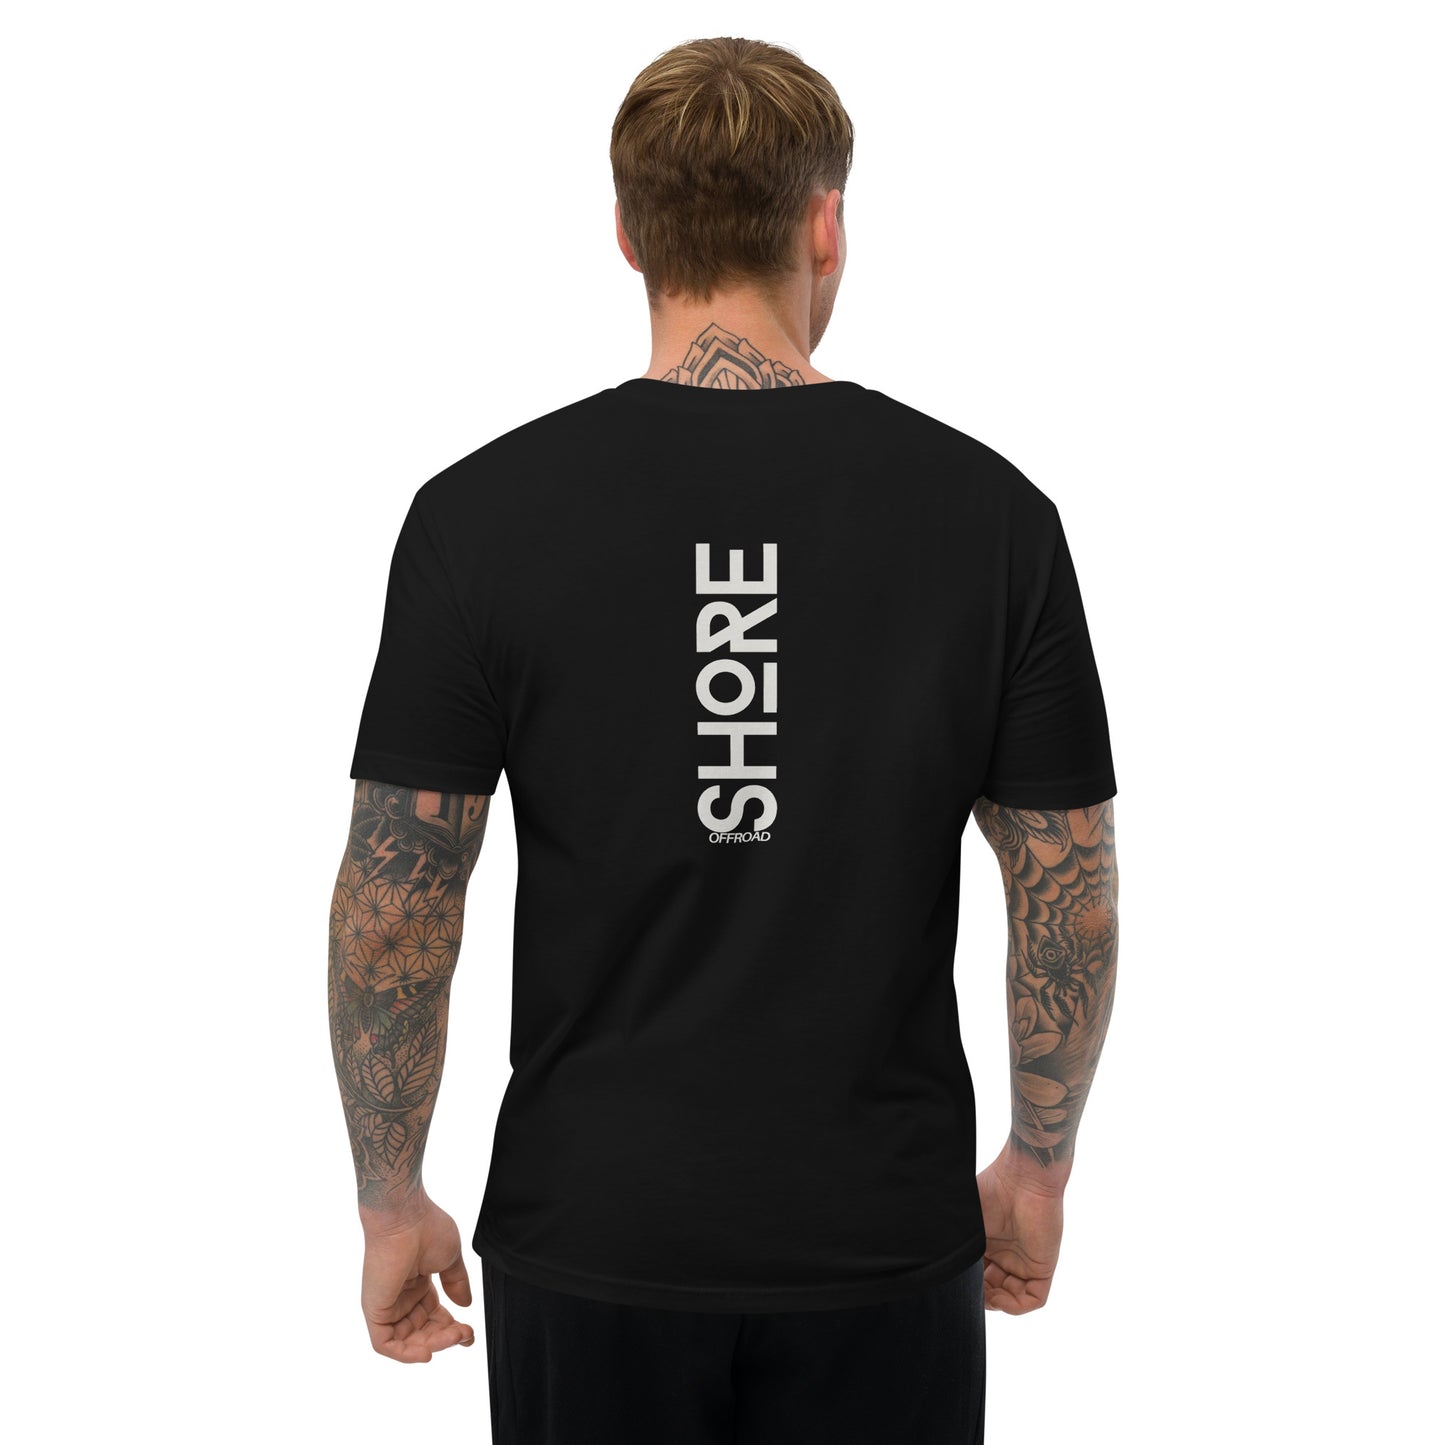 a man wearing a black shirt with the words shop on it